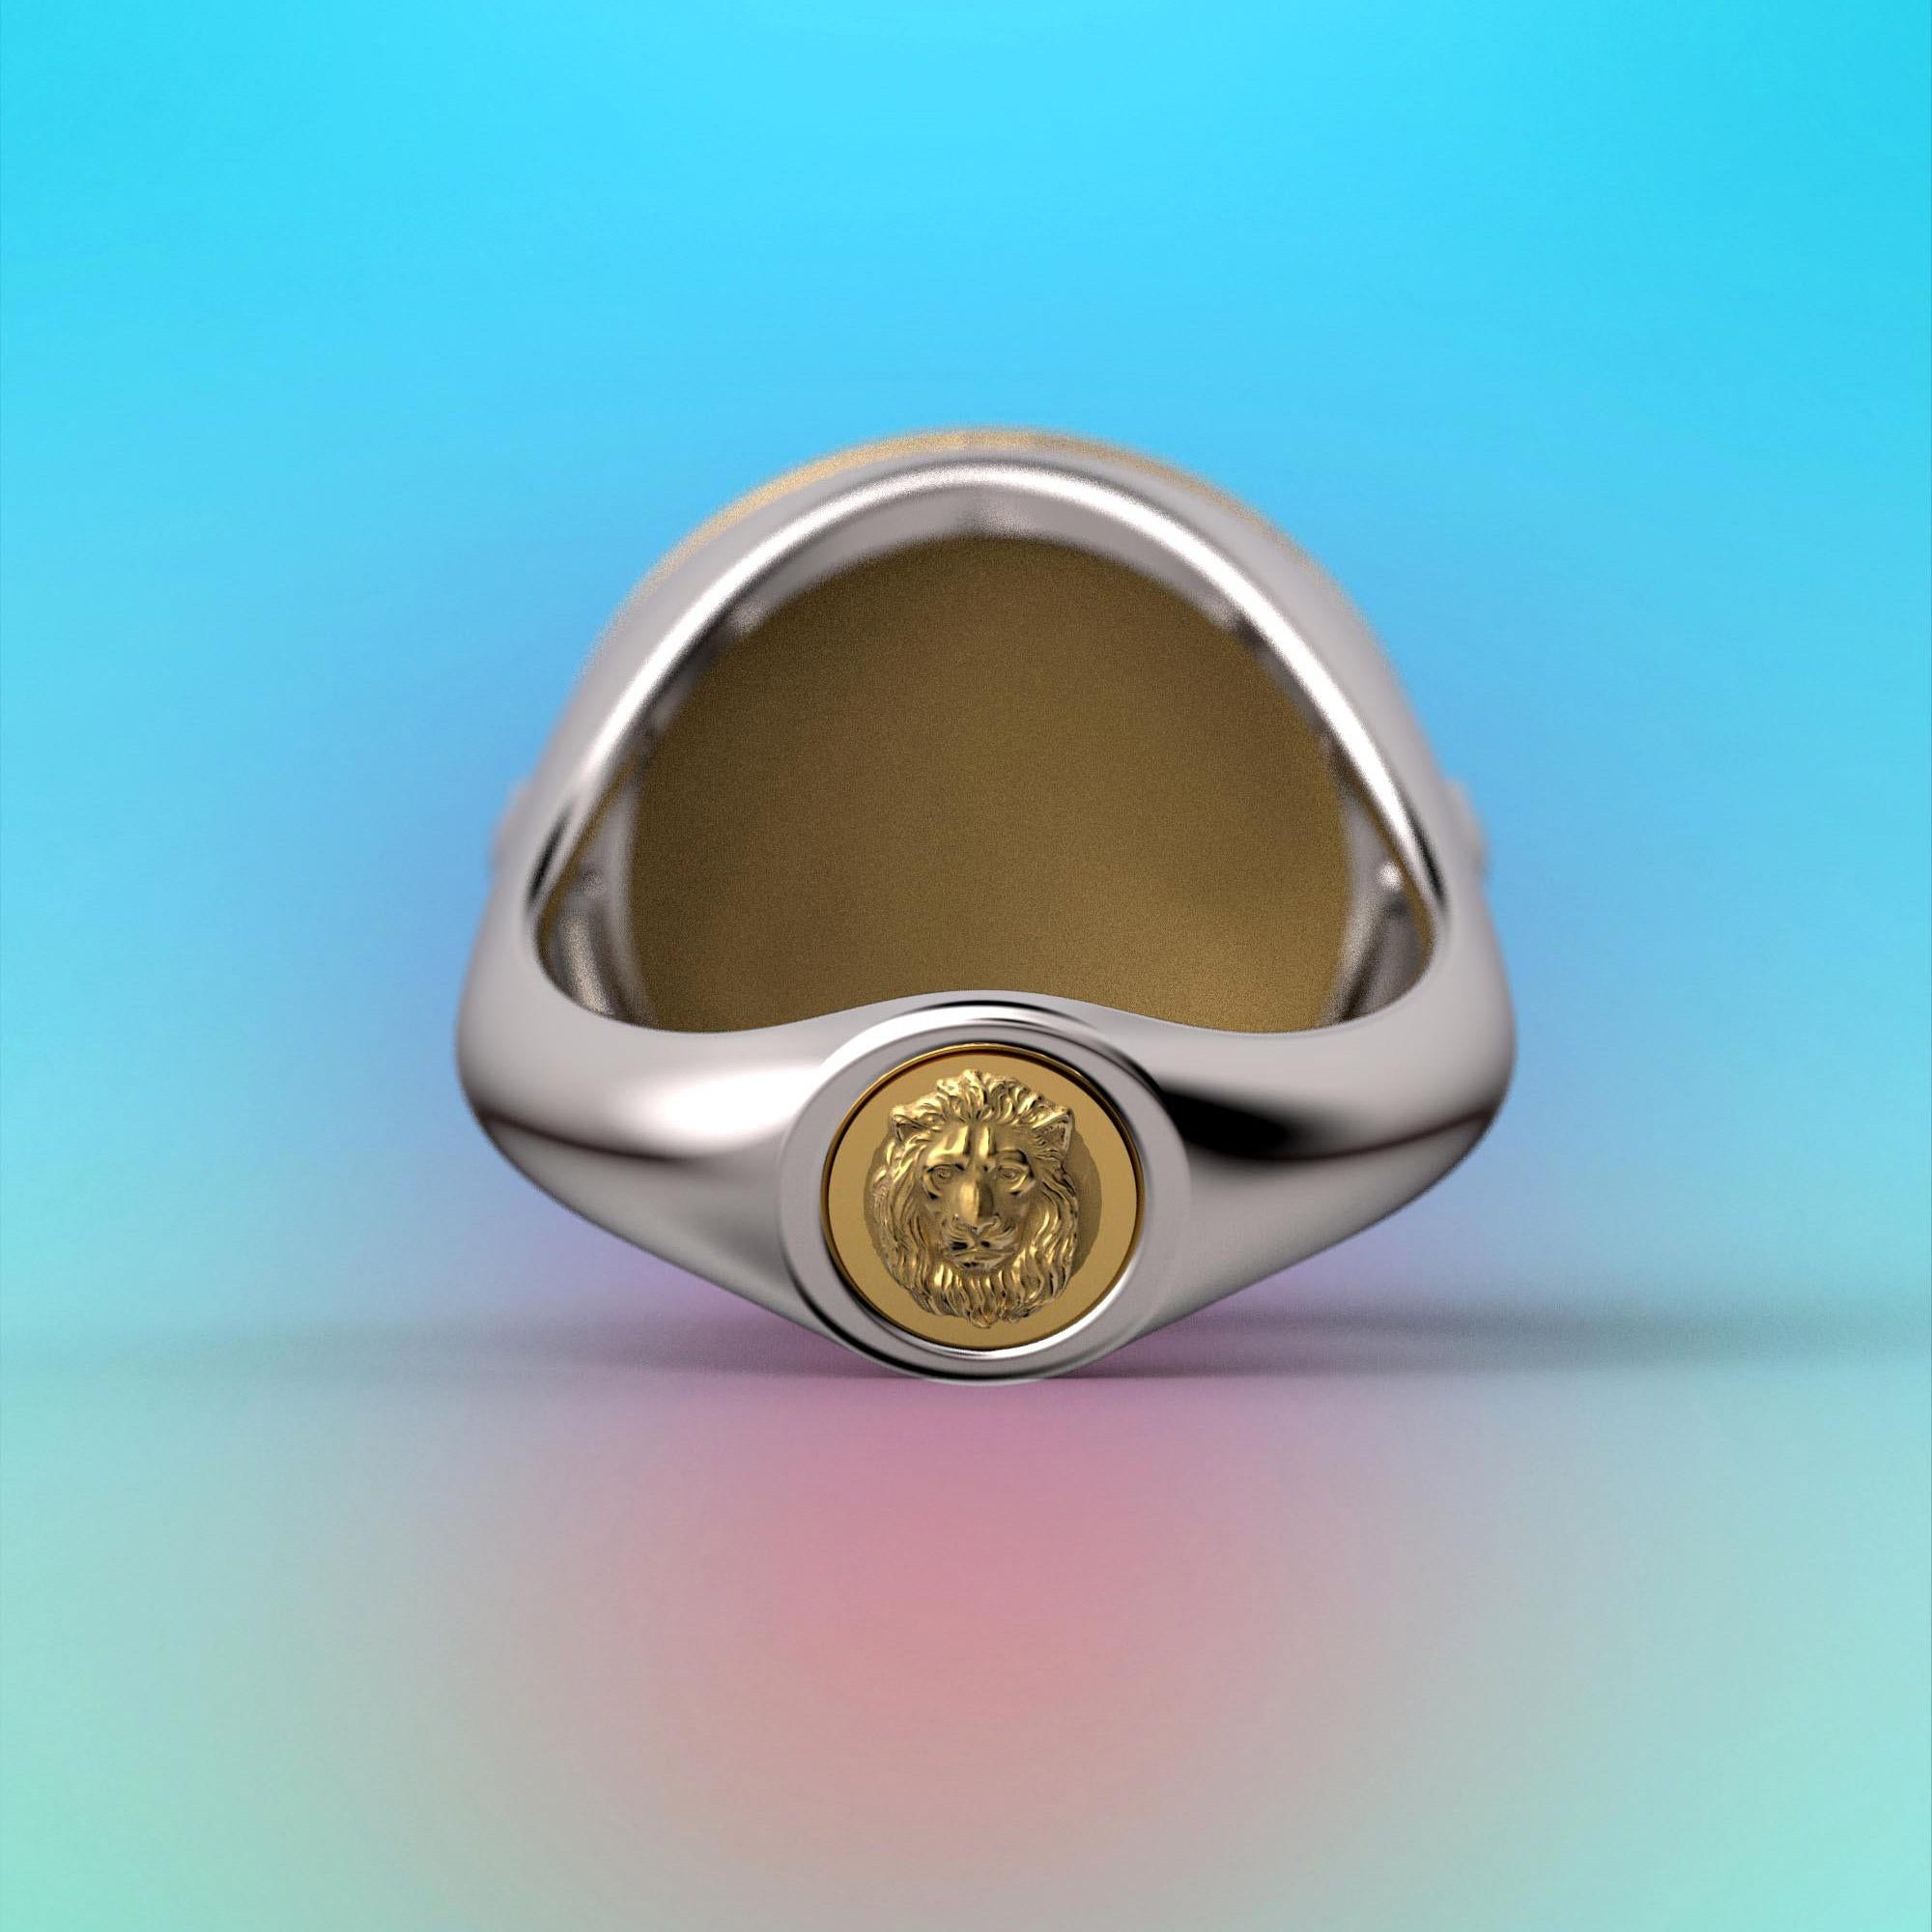 For Sale:  14k Ancient Roman Style Gold Coin Ring with a reproduction of a Roman Solidus 5